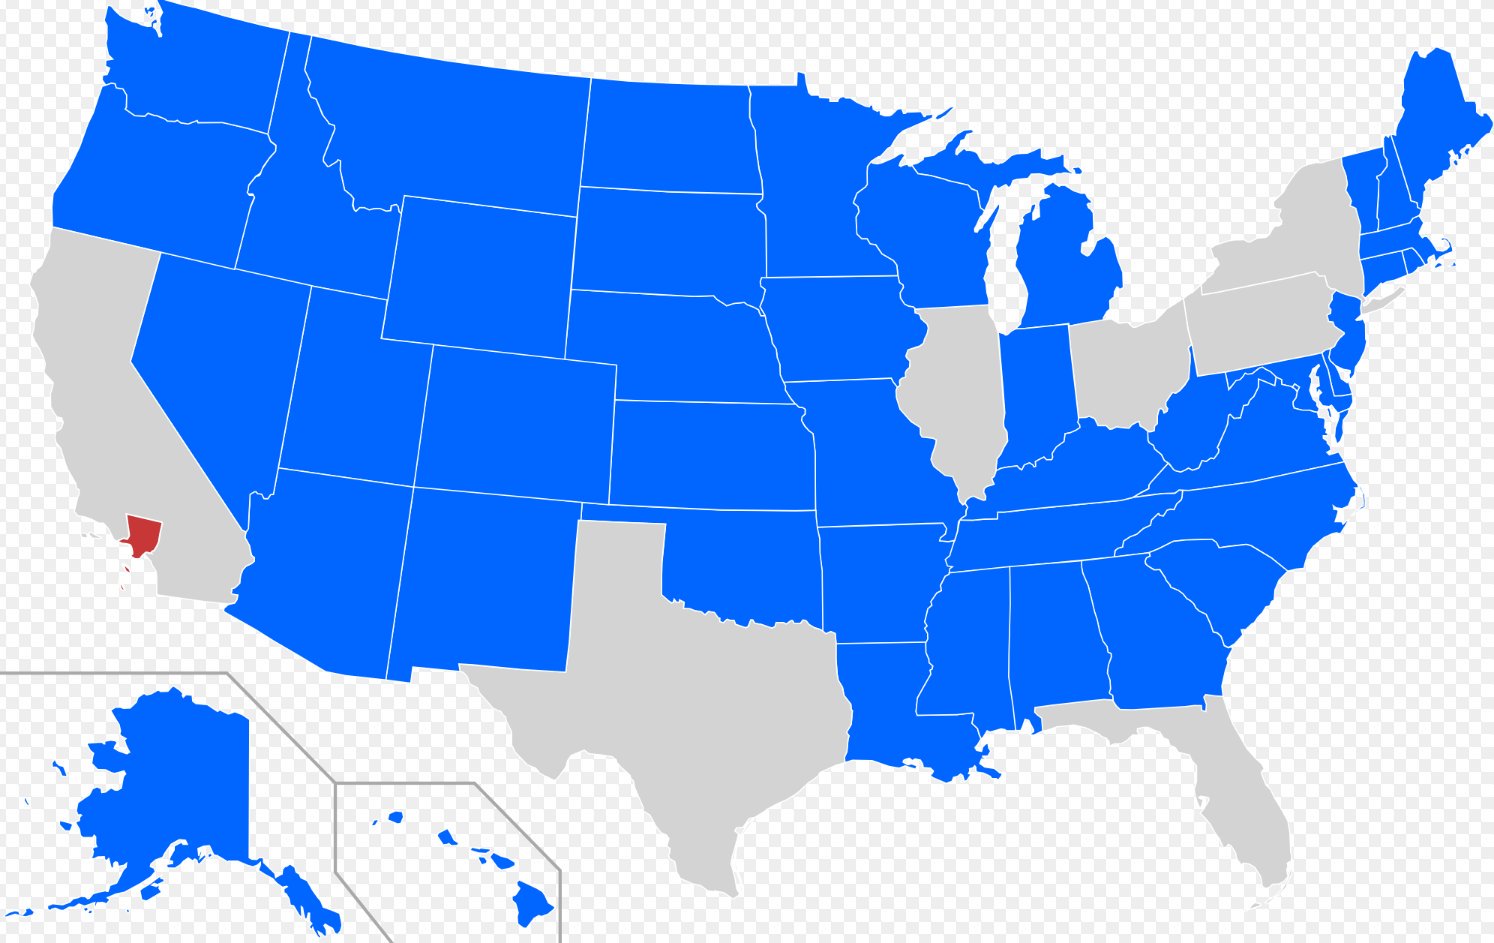 Blue States Mean Smaller Populations Than LA County